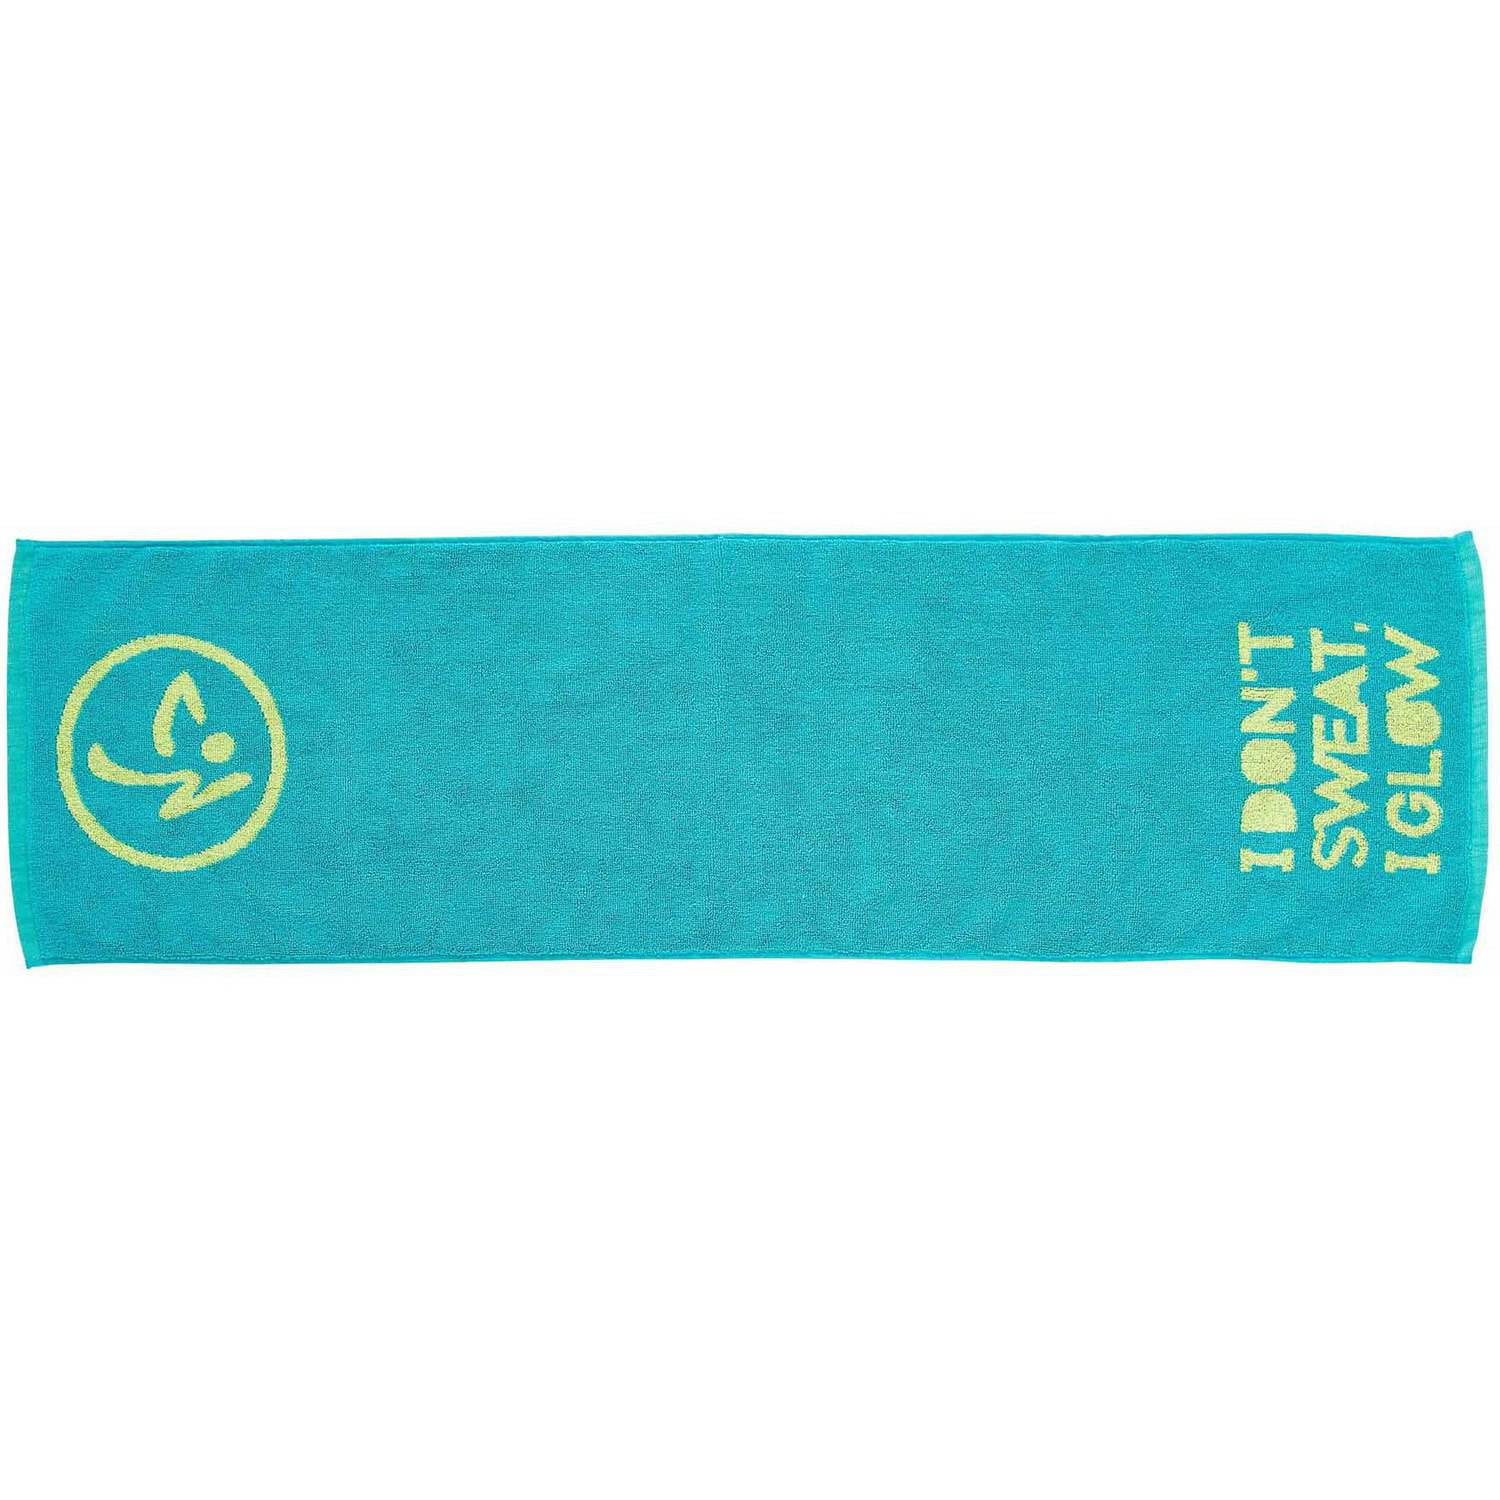 Zumba Fitness Handtuch Towel For All By All 100 x 26 cm ♥♥♥ NEU TOP 